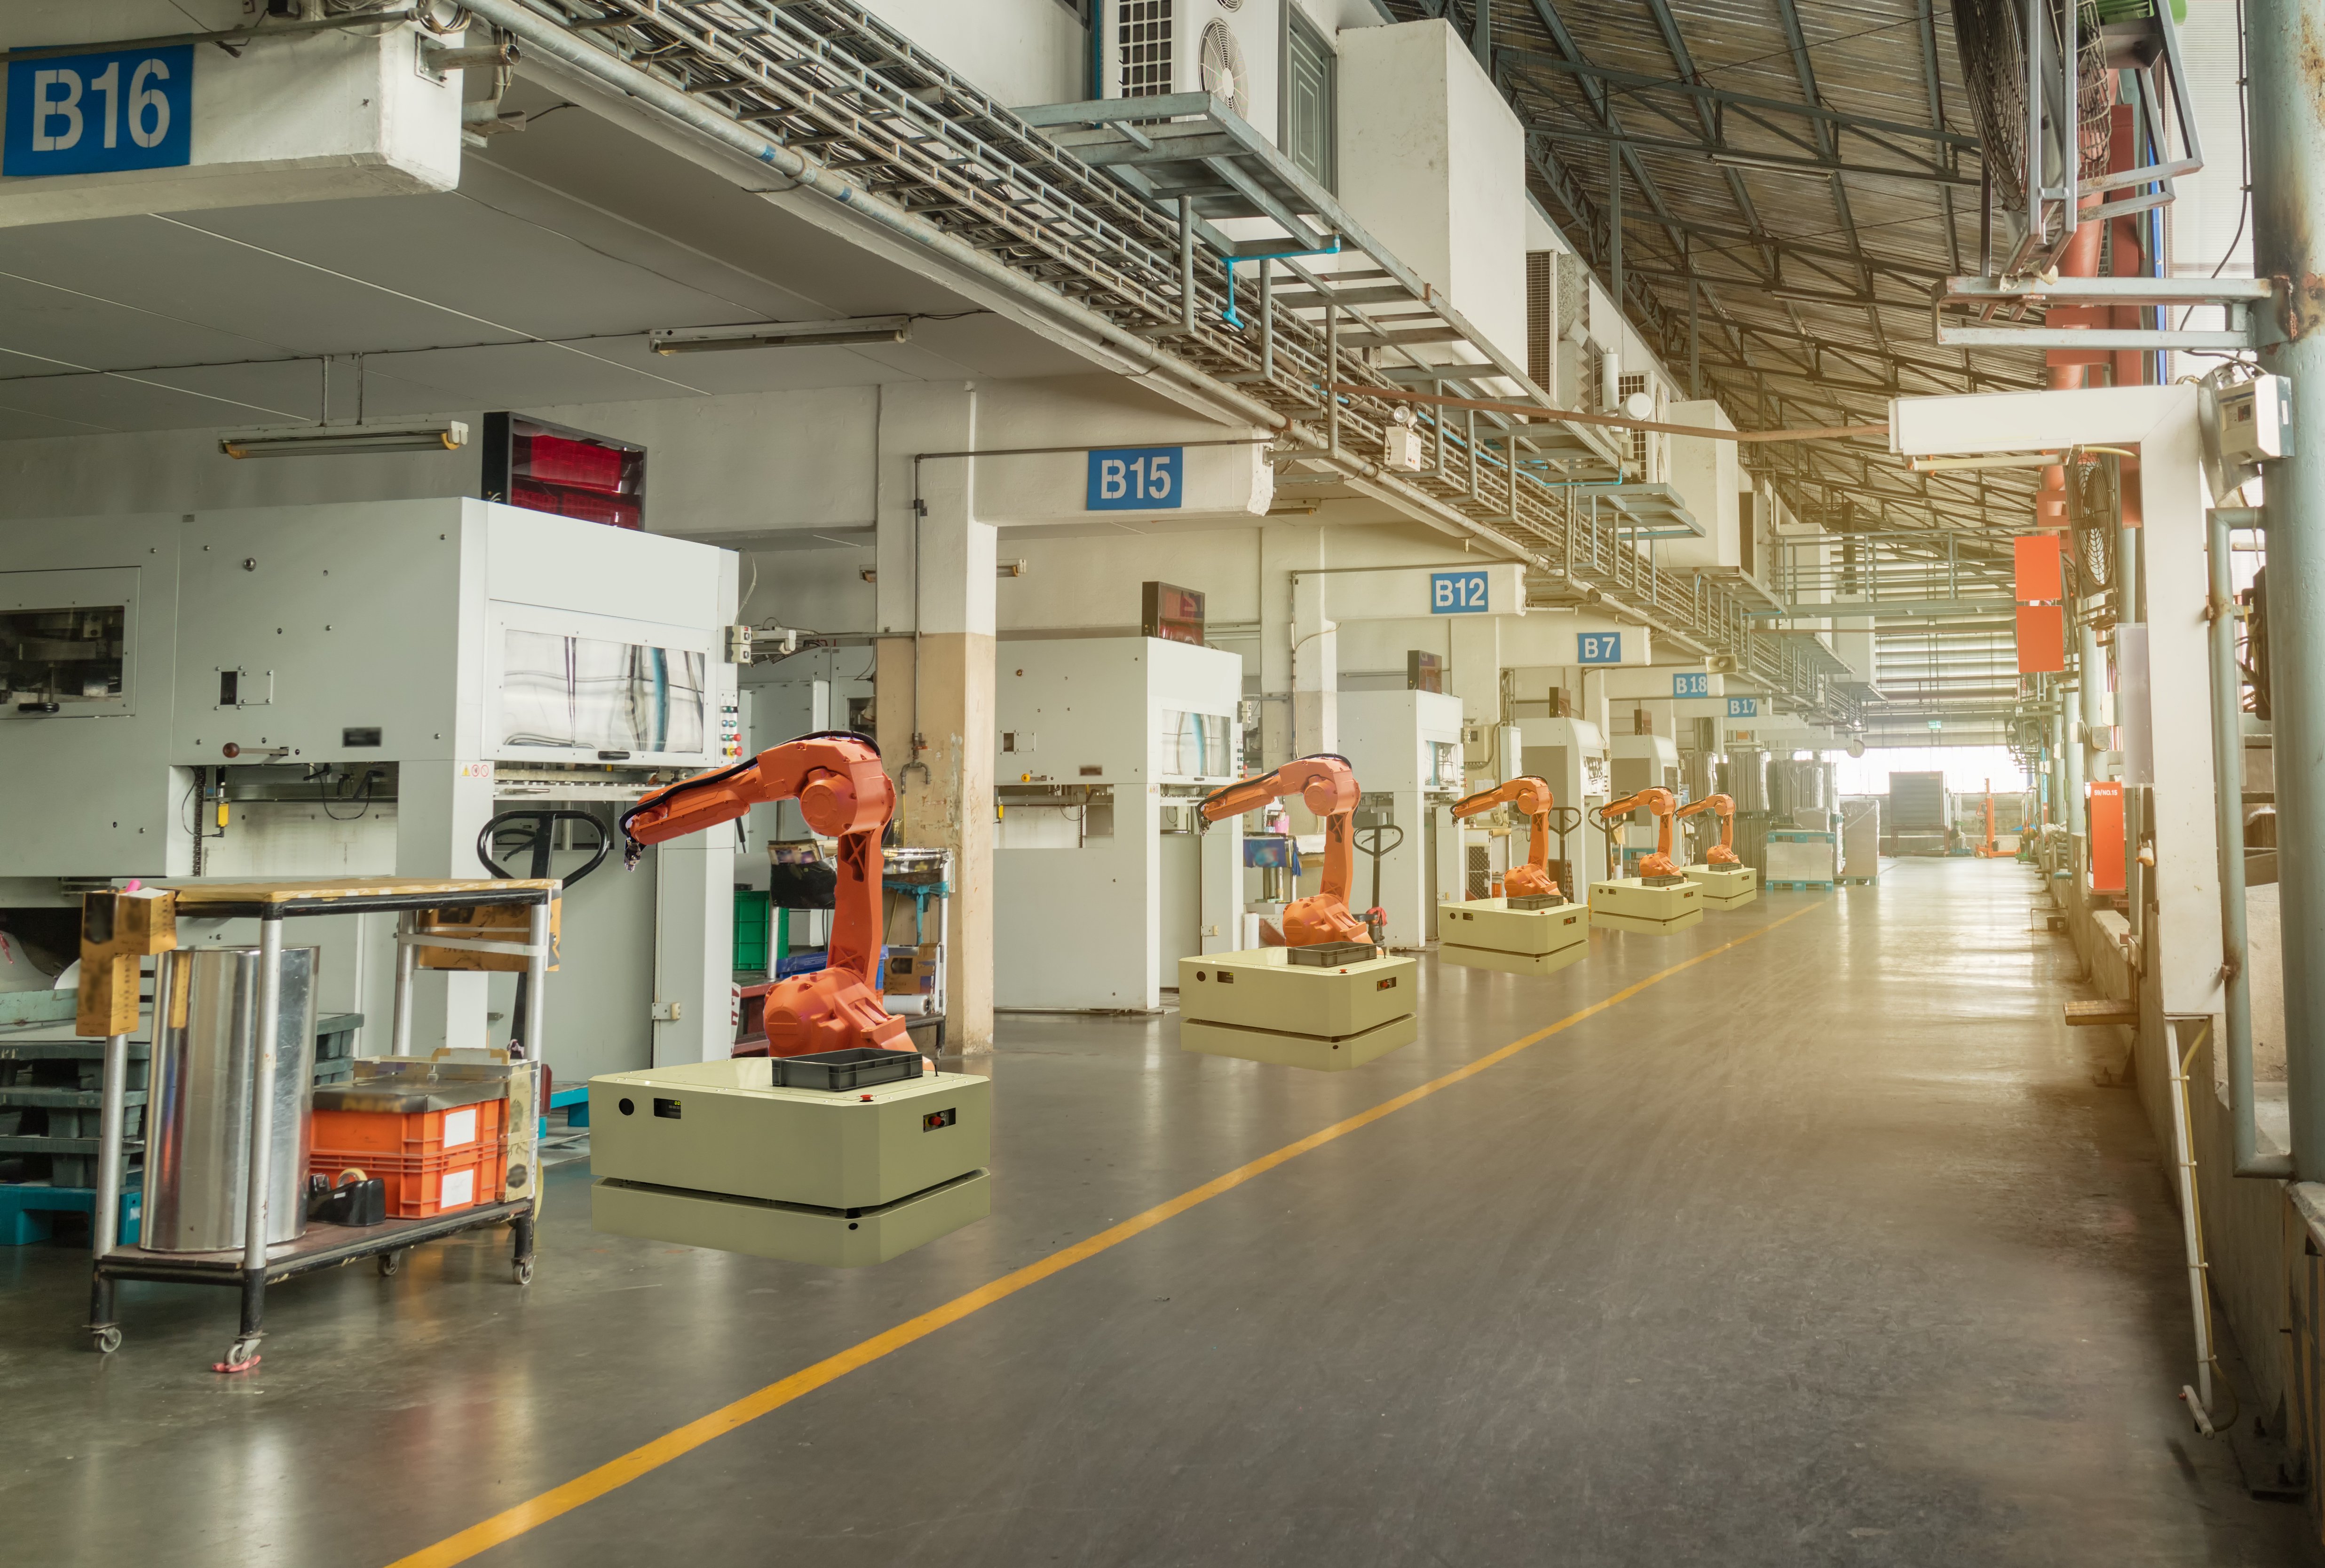 Factory using automation technology